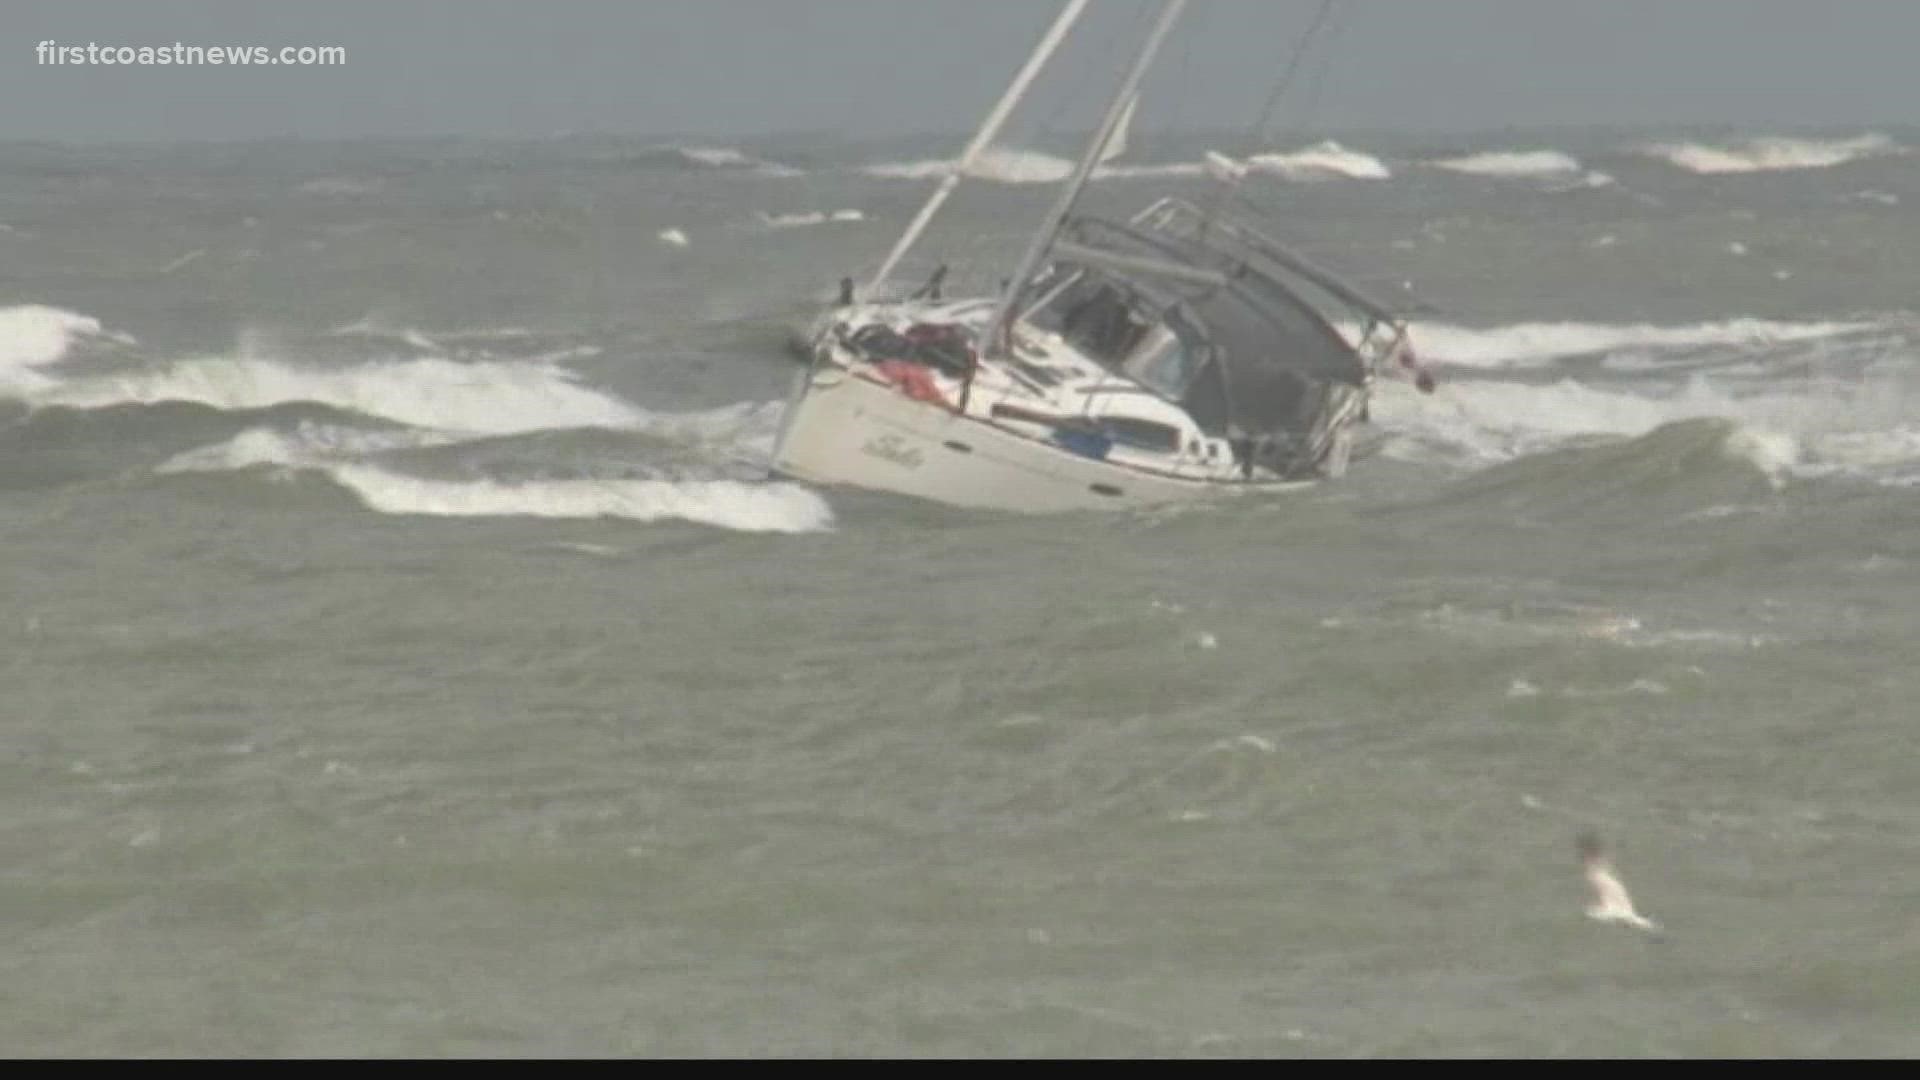 A boat ran onto a sandbar in the St. Augustine Inlet Thursday afternoon. St. John's County Fire and Rescue says no one was hurt in the accident.